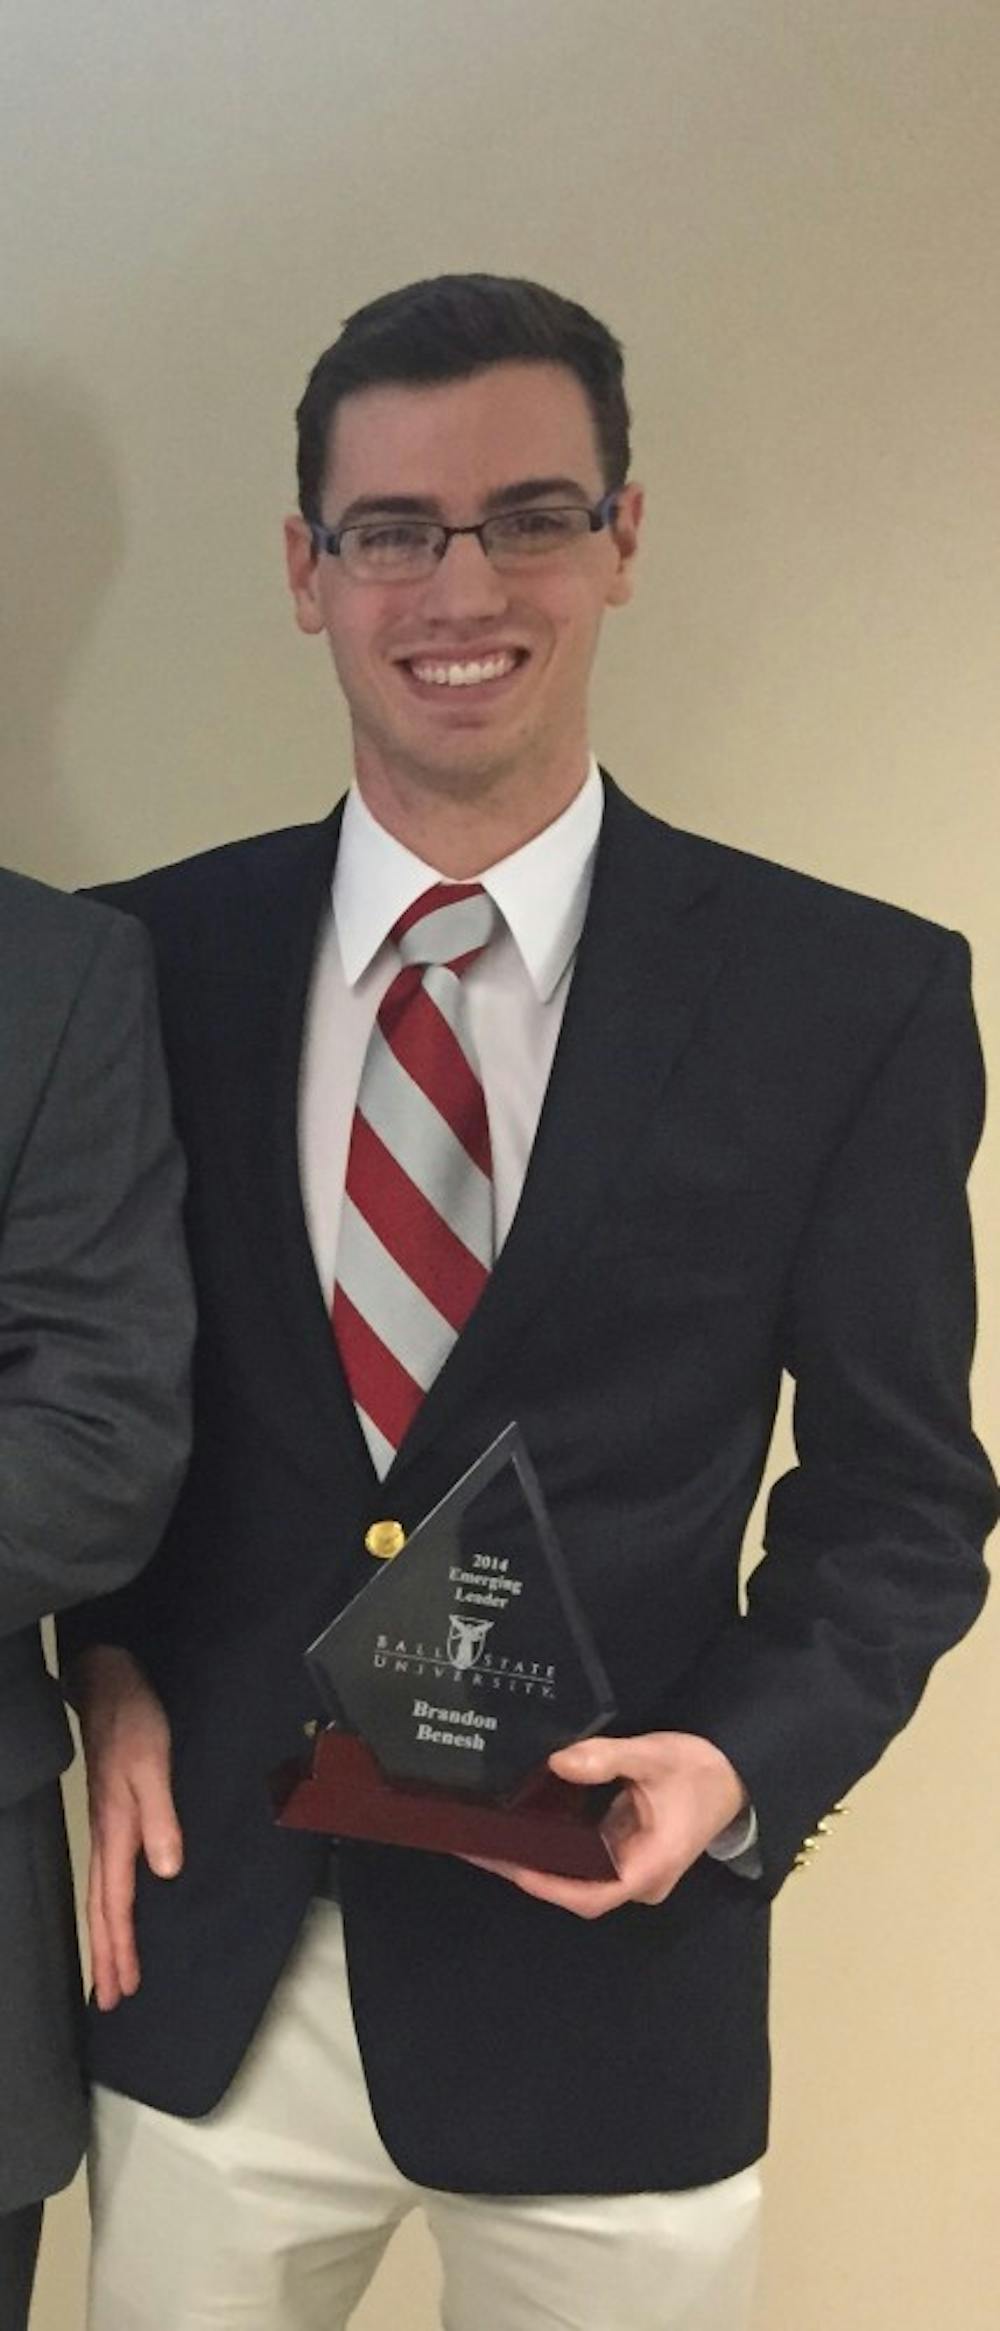 <p>Brandon Benesh, Theta Chi's vice president of health and safety, was put into a medically induced coma after he went into cardiac arrest late Wednesday, July 29. The Greek community is bonding together to support Benesh and Theta Chi. </p><p>Photo provided by Alex Penilla</p>